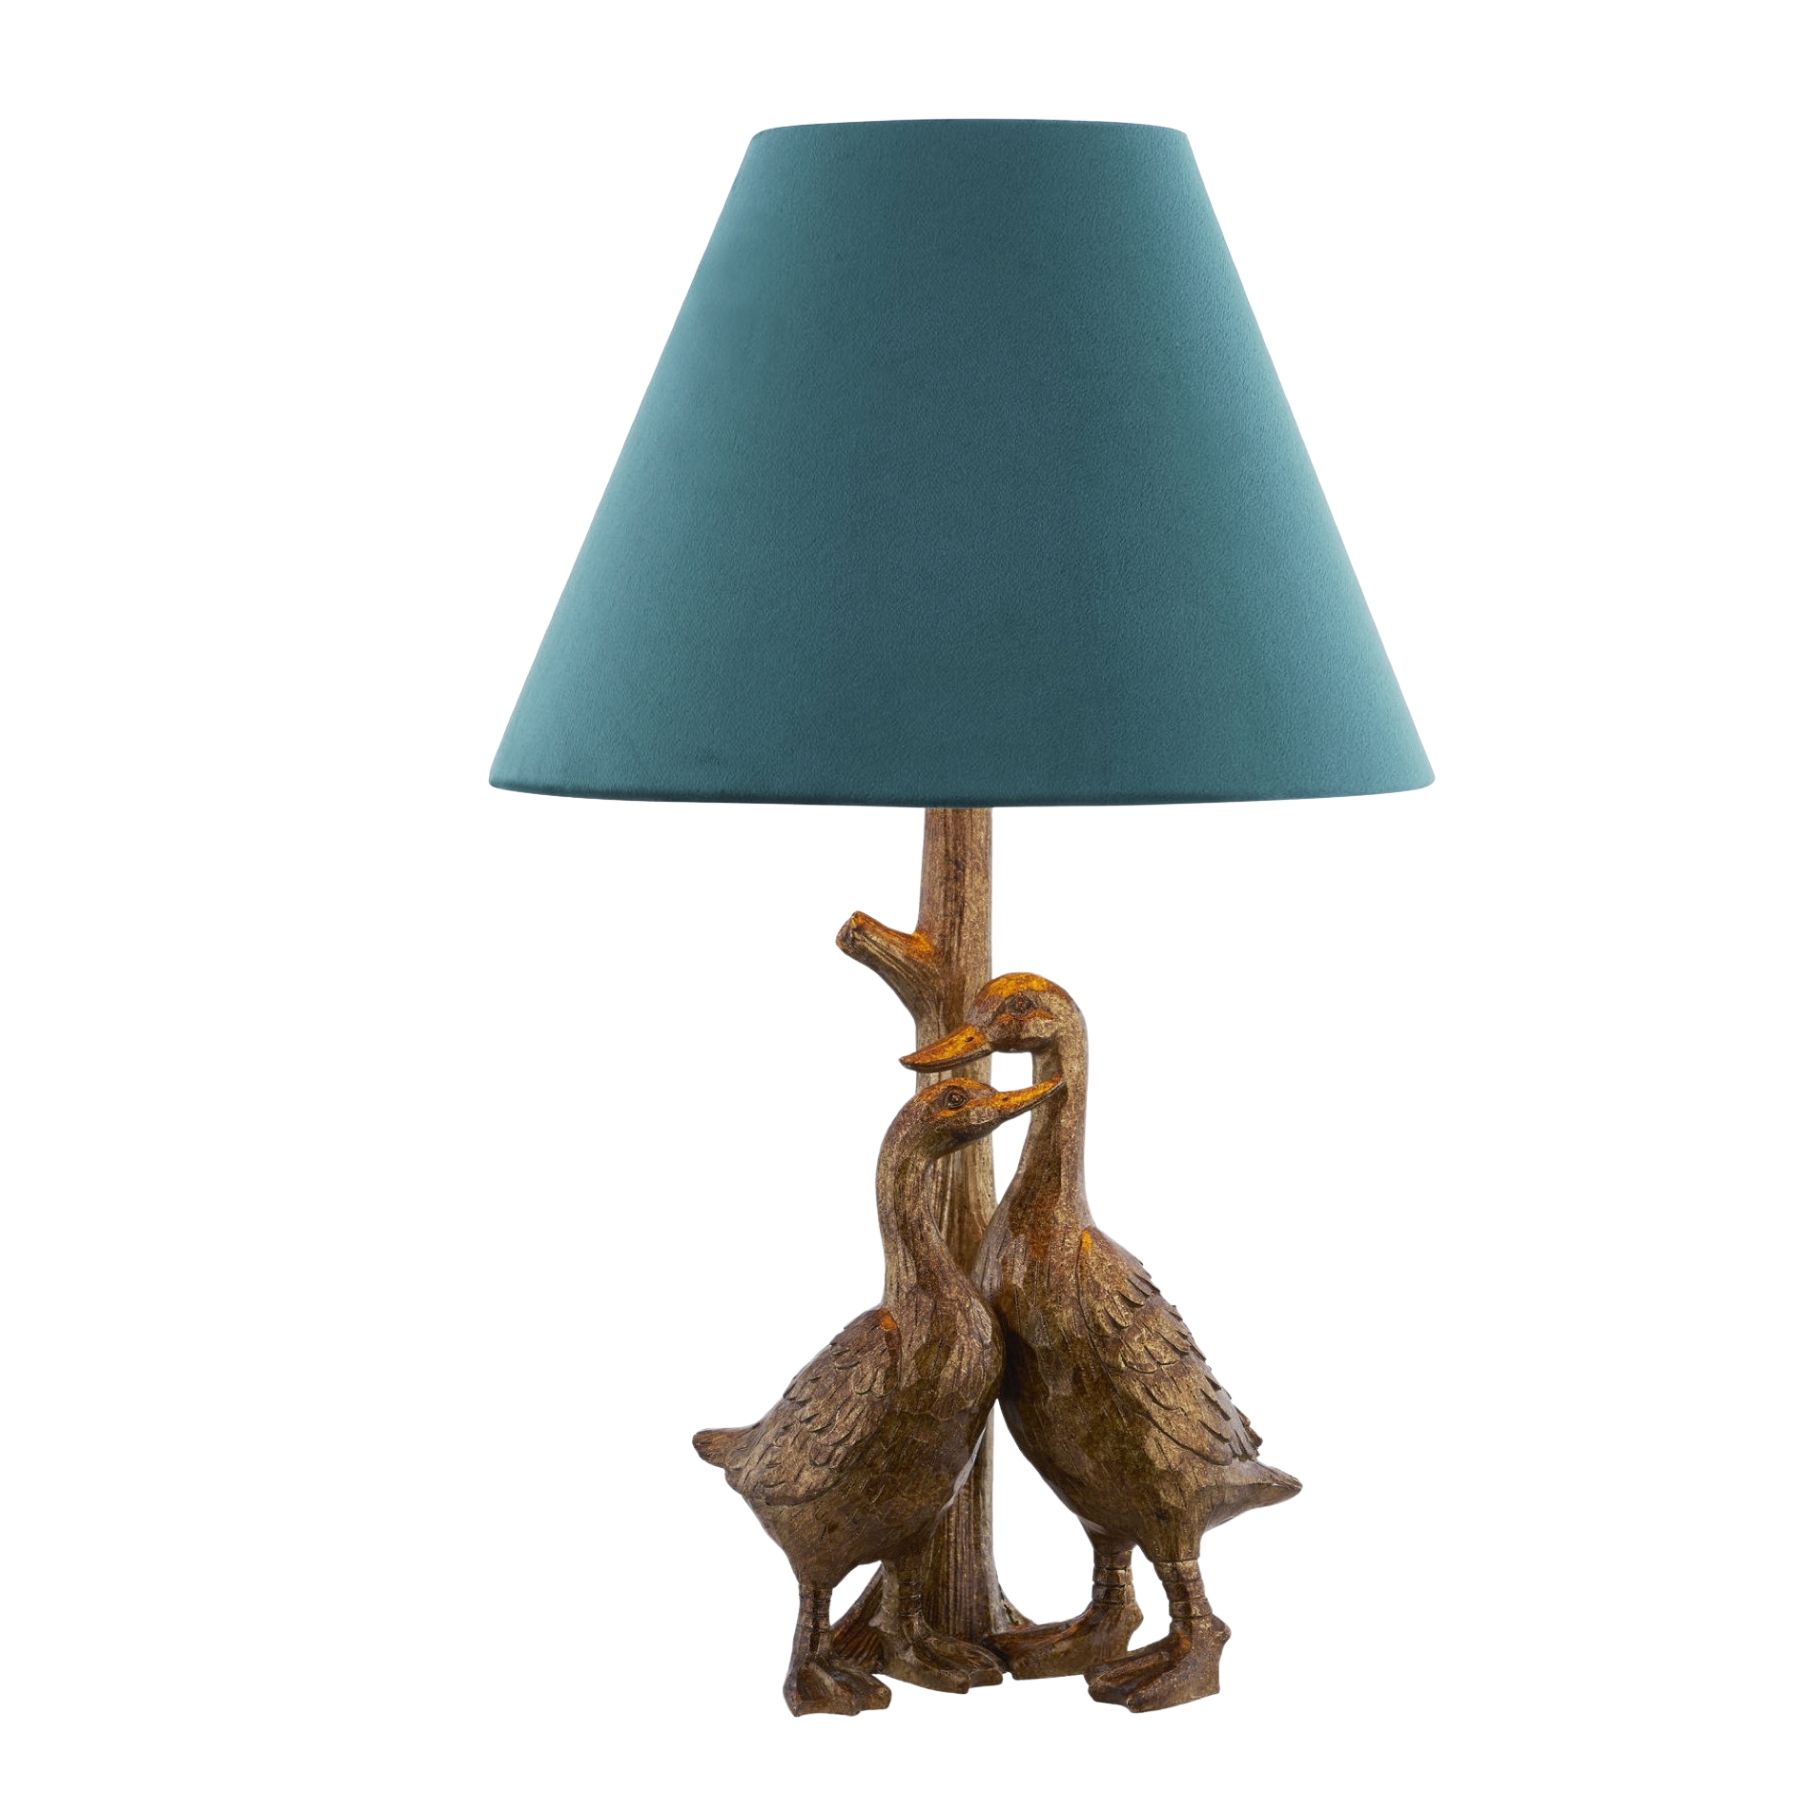 Gold Pair Of Ducks Table Lamps With Velvet Shade - Image 2